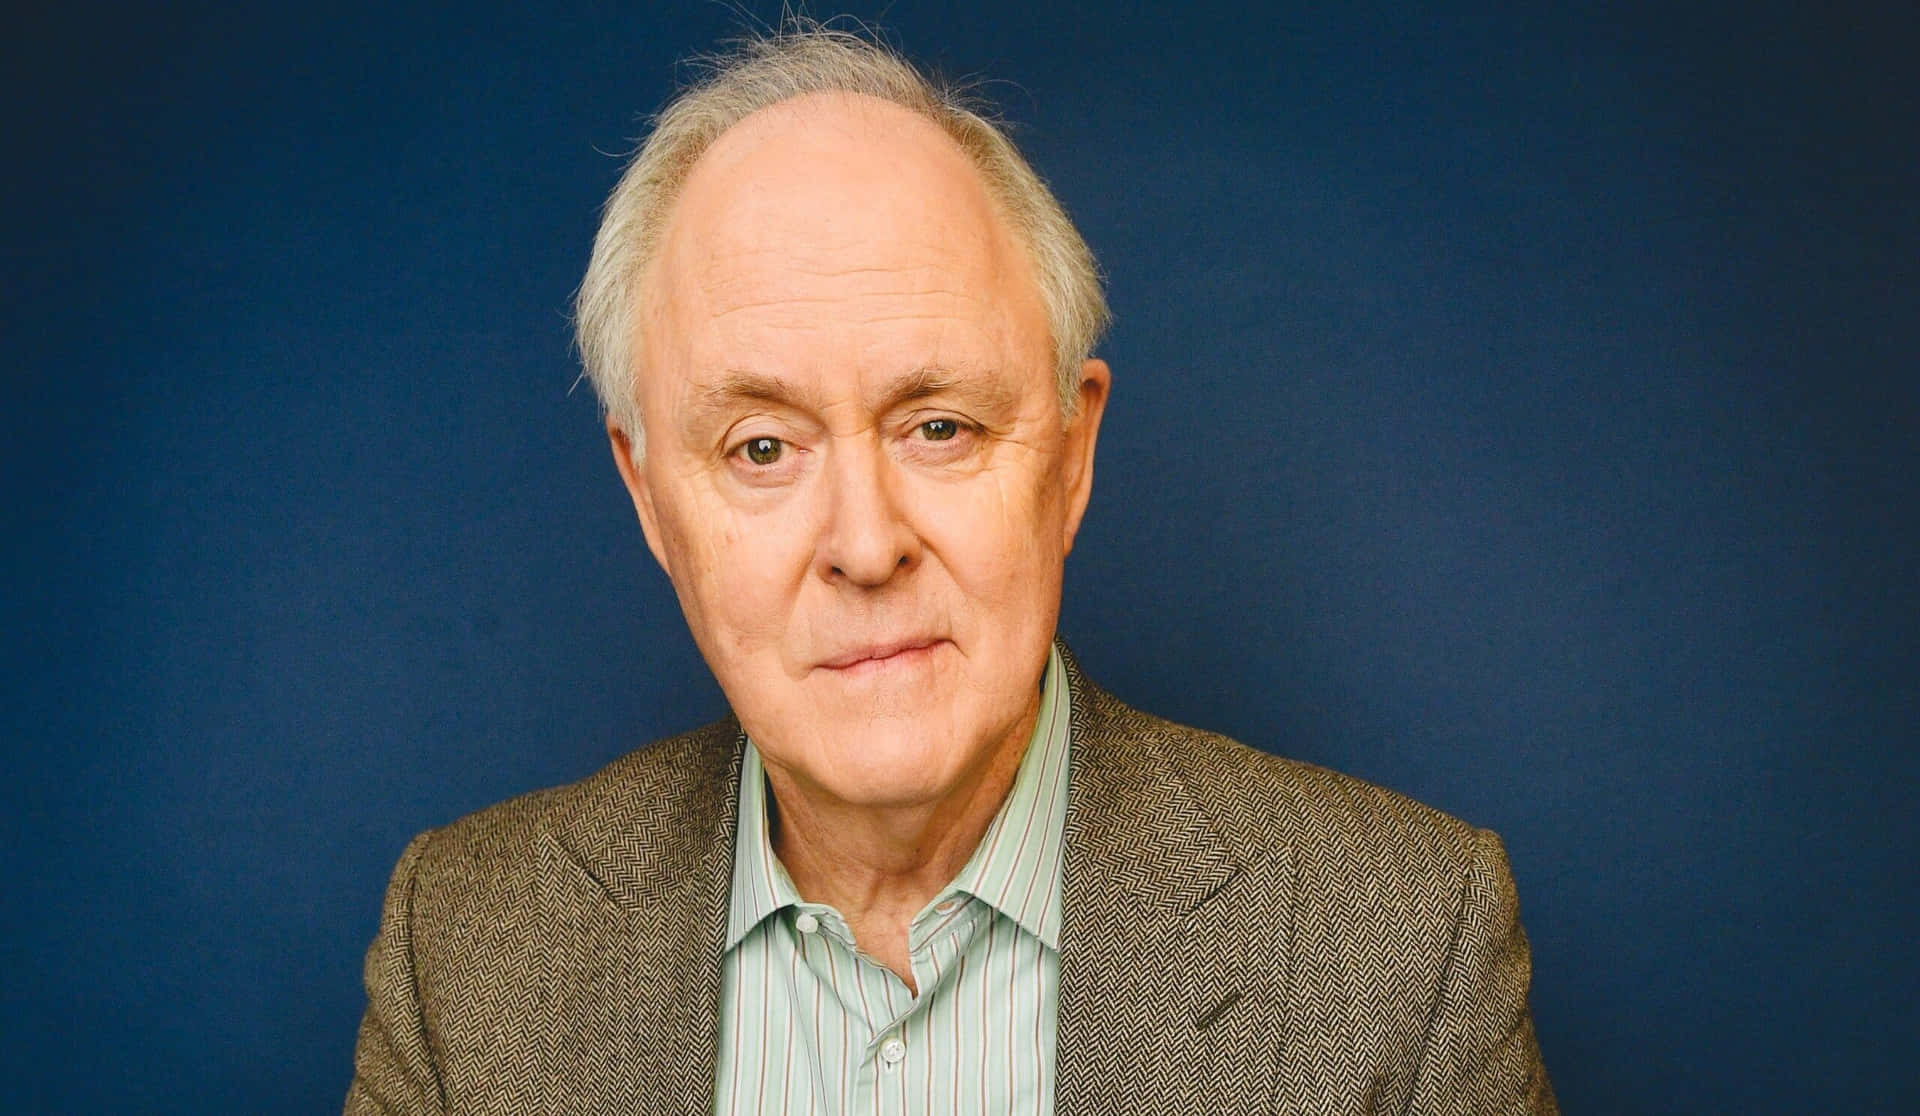 Distinguished Actor John Lithgow in a Portrait Shot Wallpaper